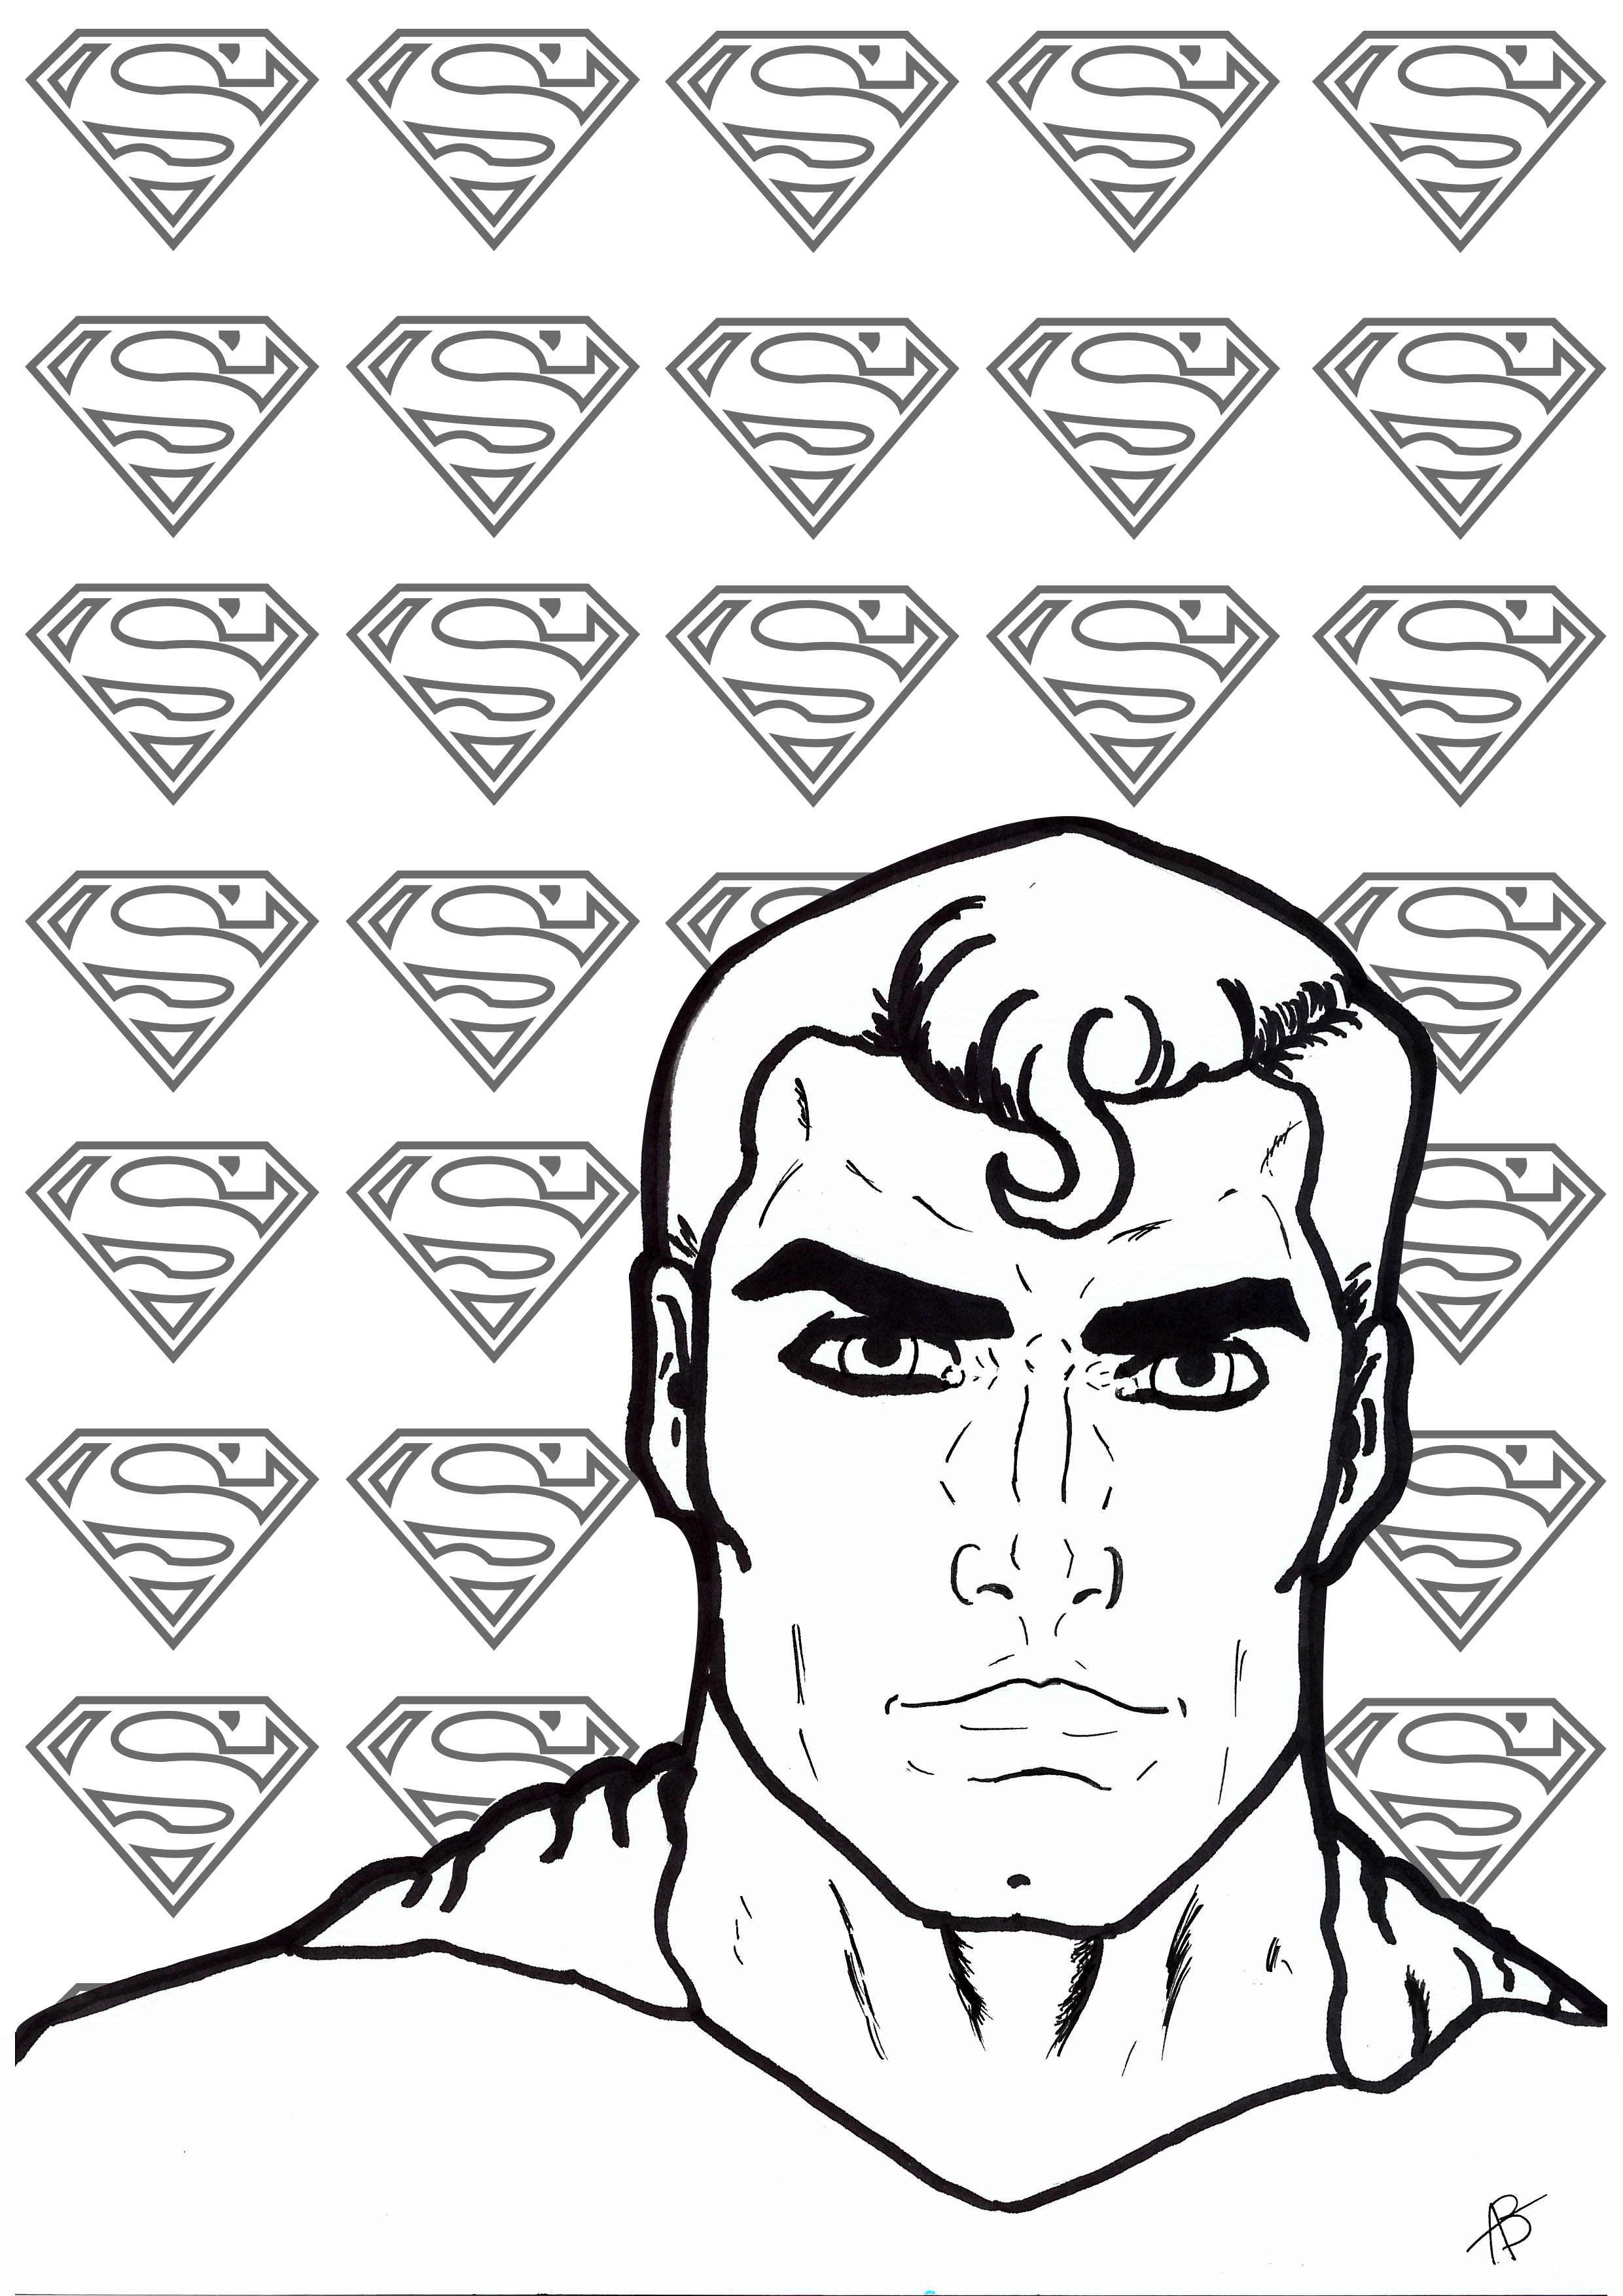 Coloring inspired by the superhero Superman, Artist : Allan